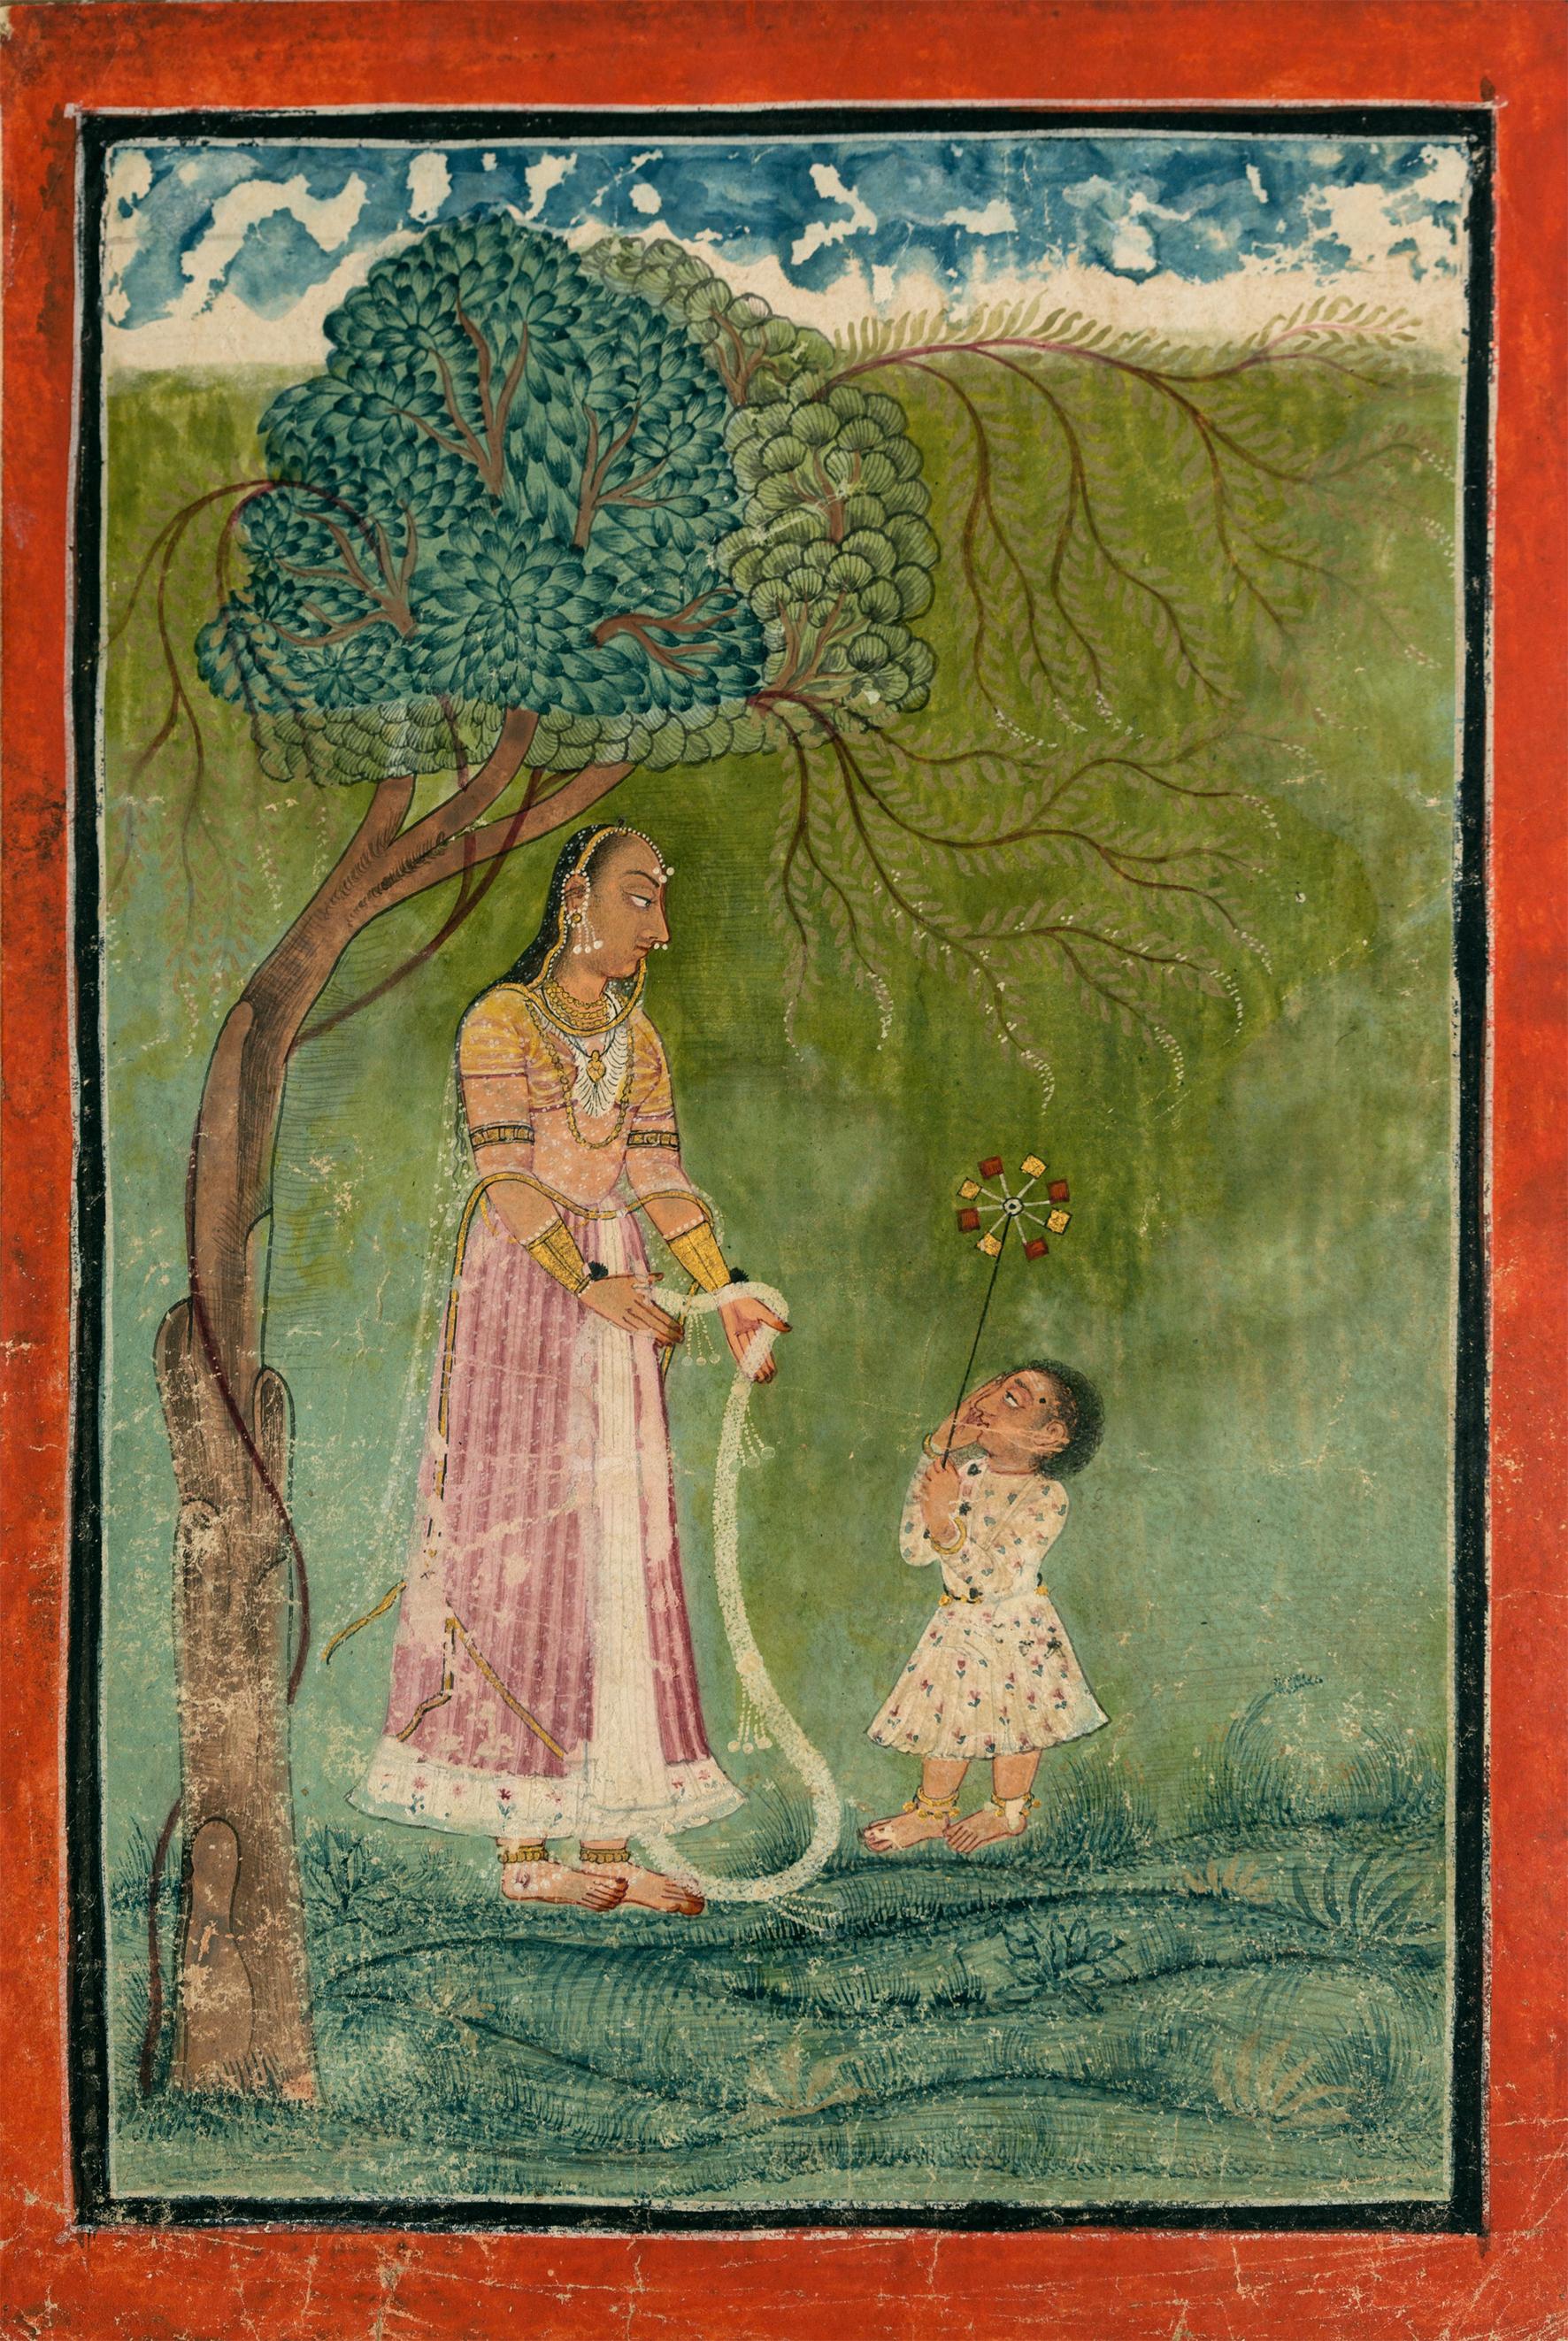 Indian Miniature Painting - A Lady Holding Out A Garland To A Child